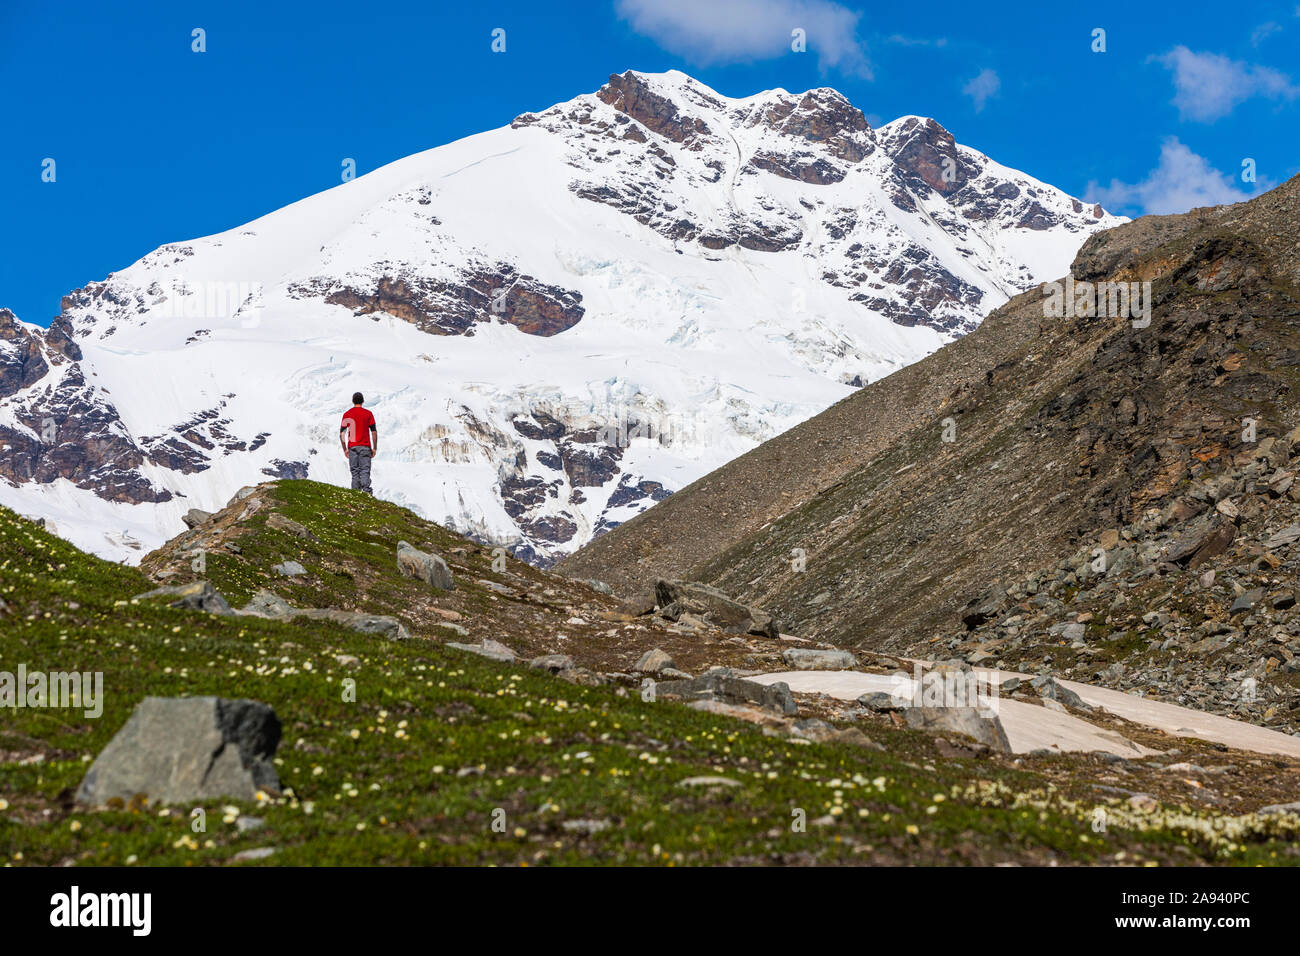 Mount Silvertip rises over a man in an alpine meadow near Thayer Hut in the Alaska Range; Alaska, United States of America Stock Photo